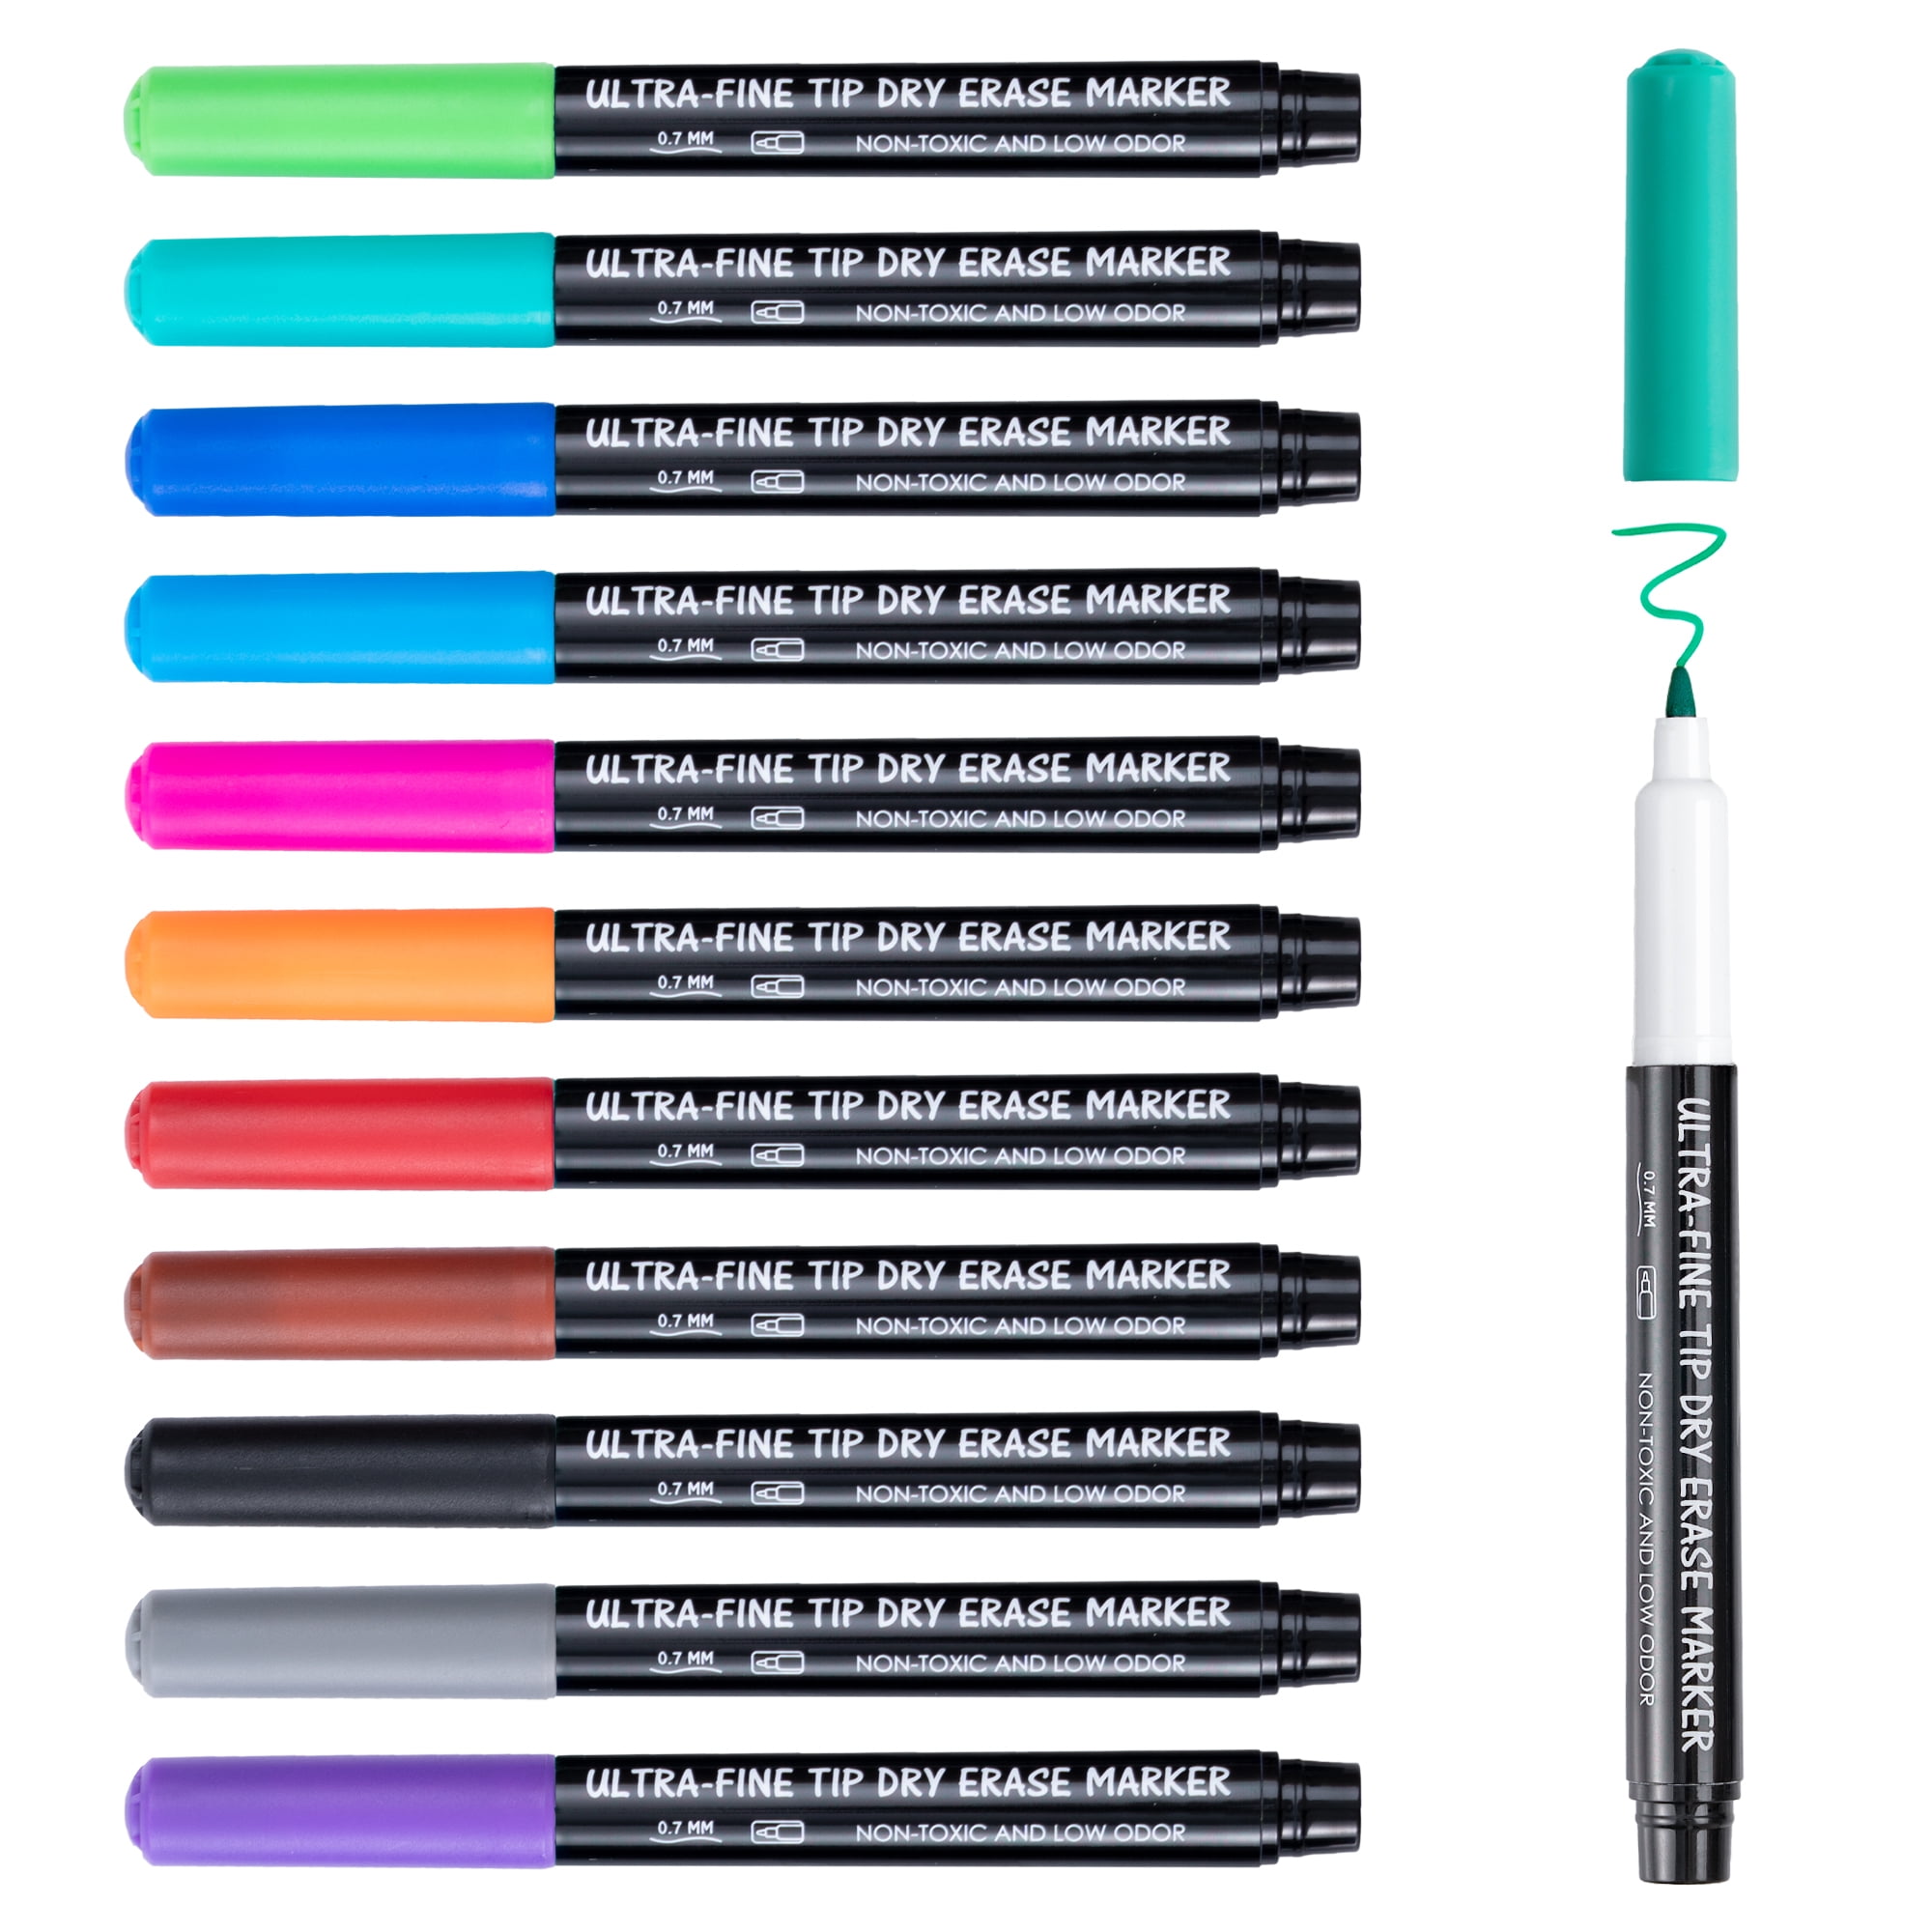 VUSIGN Dry Erase Markers, 12 Pack White Board Markers Dry Erase, Whiteboard Markers for Kids, Fine Tip, Low Odor, Assorted Colors